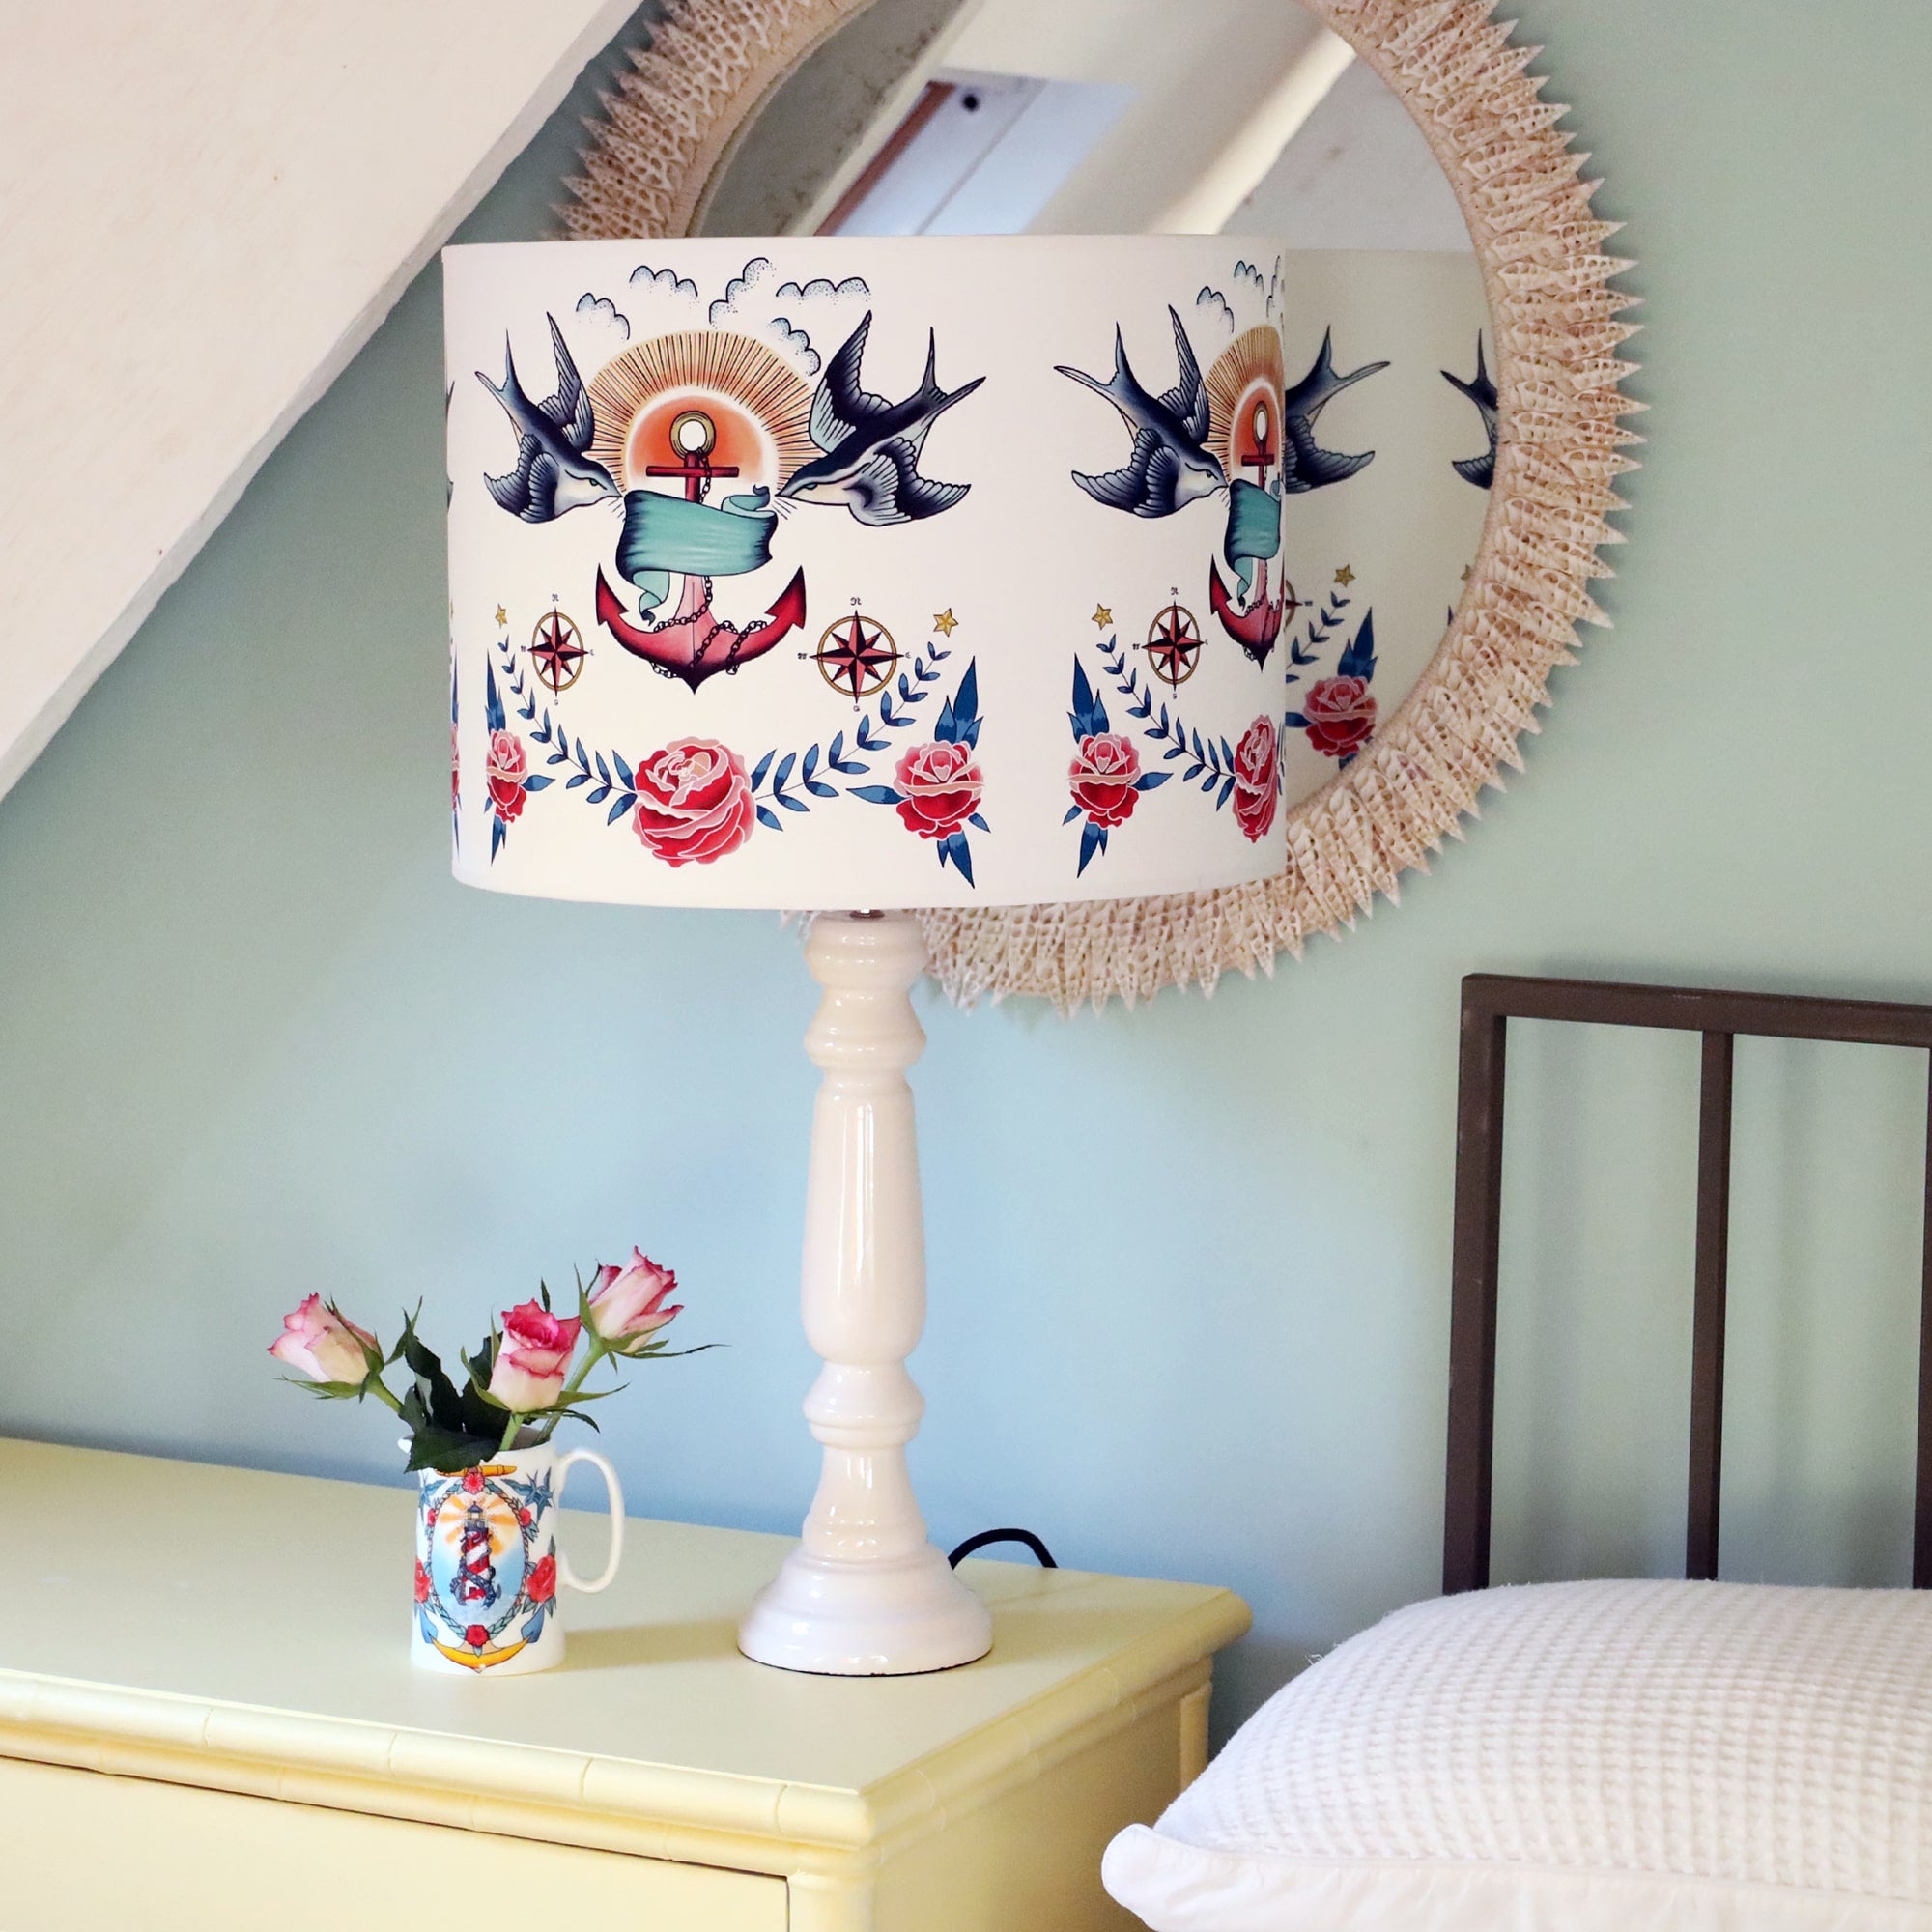 Soft yellow chest of drawers next to a bed with a glossy white lamp base and swallows, anchor and roses tattoo inspired design. There is a small jug with swallows and anchor design with red roses next to the lamp.